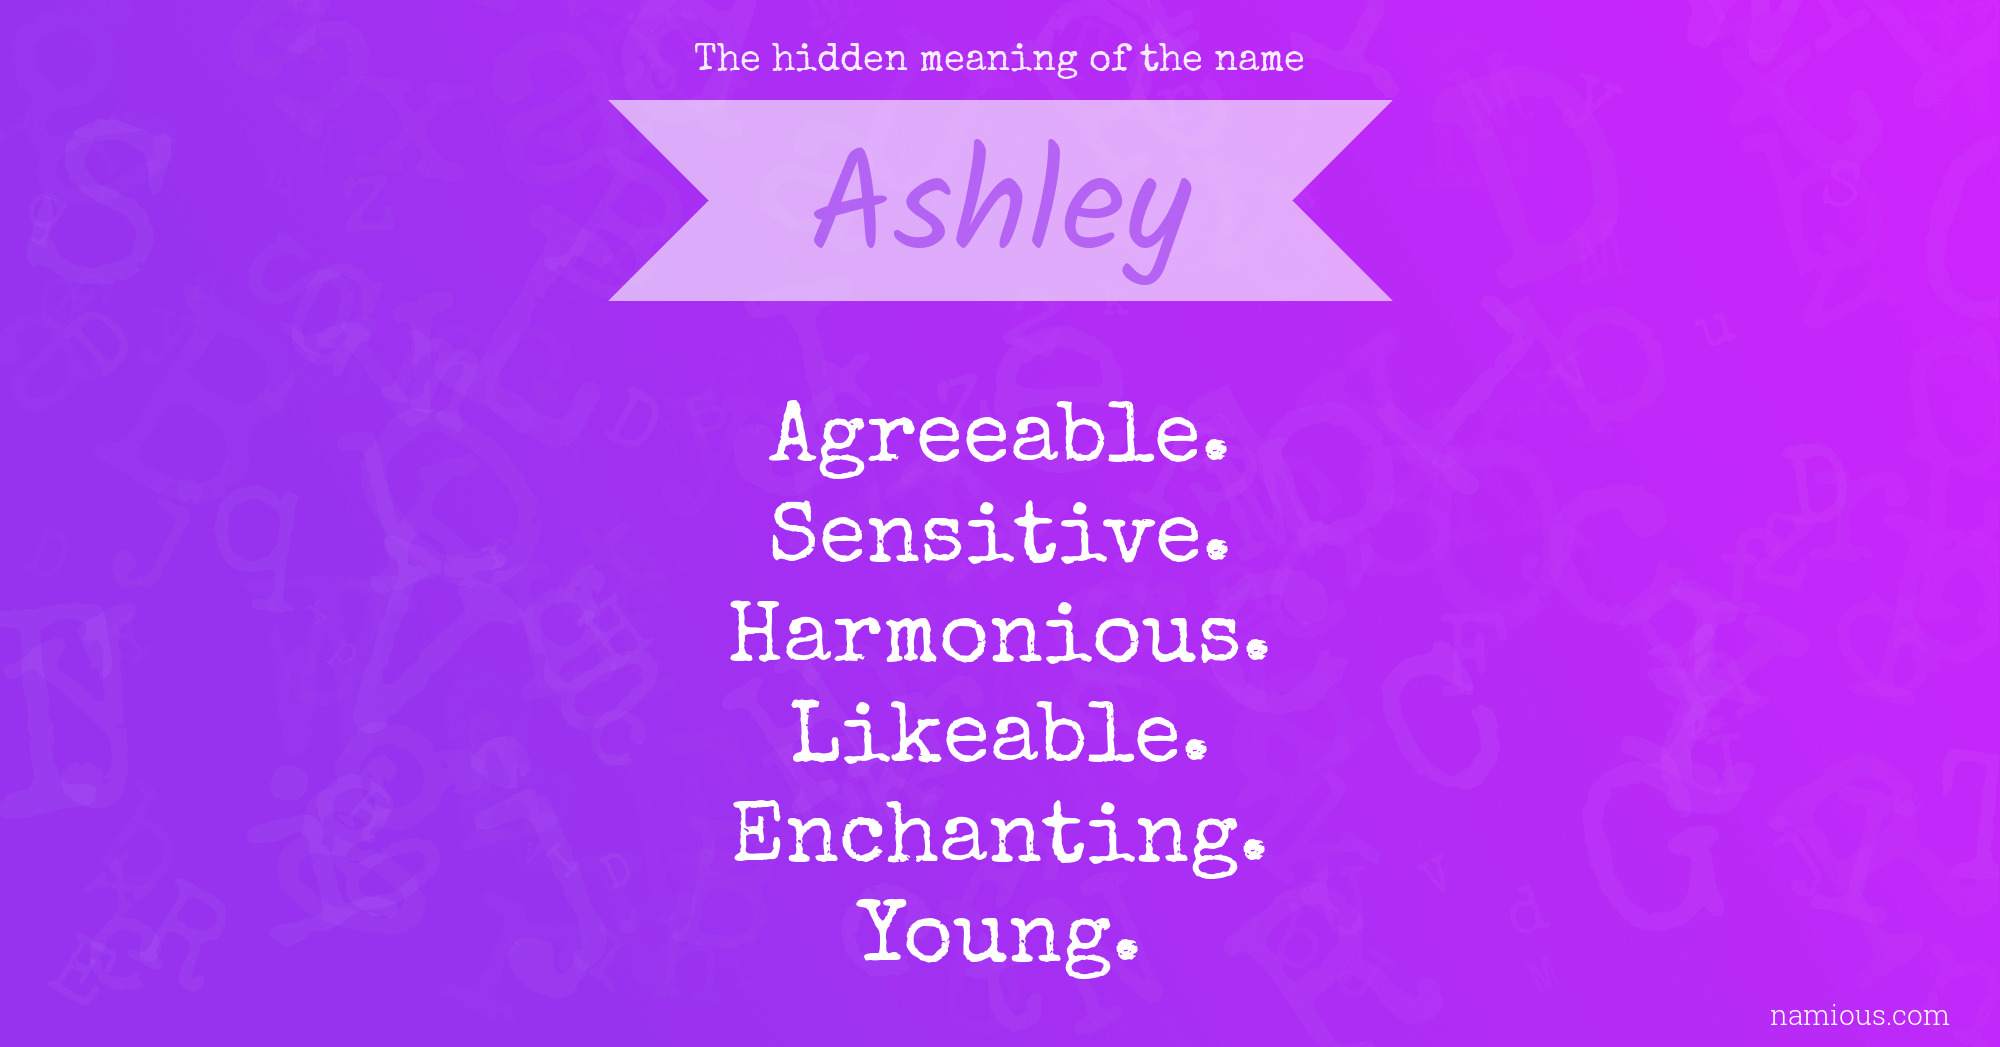 The hidden meaning of the name Ashley